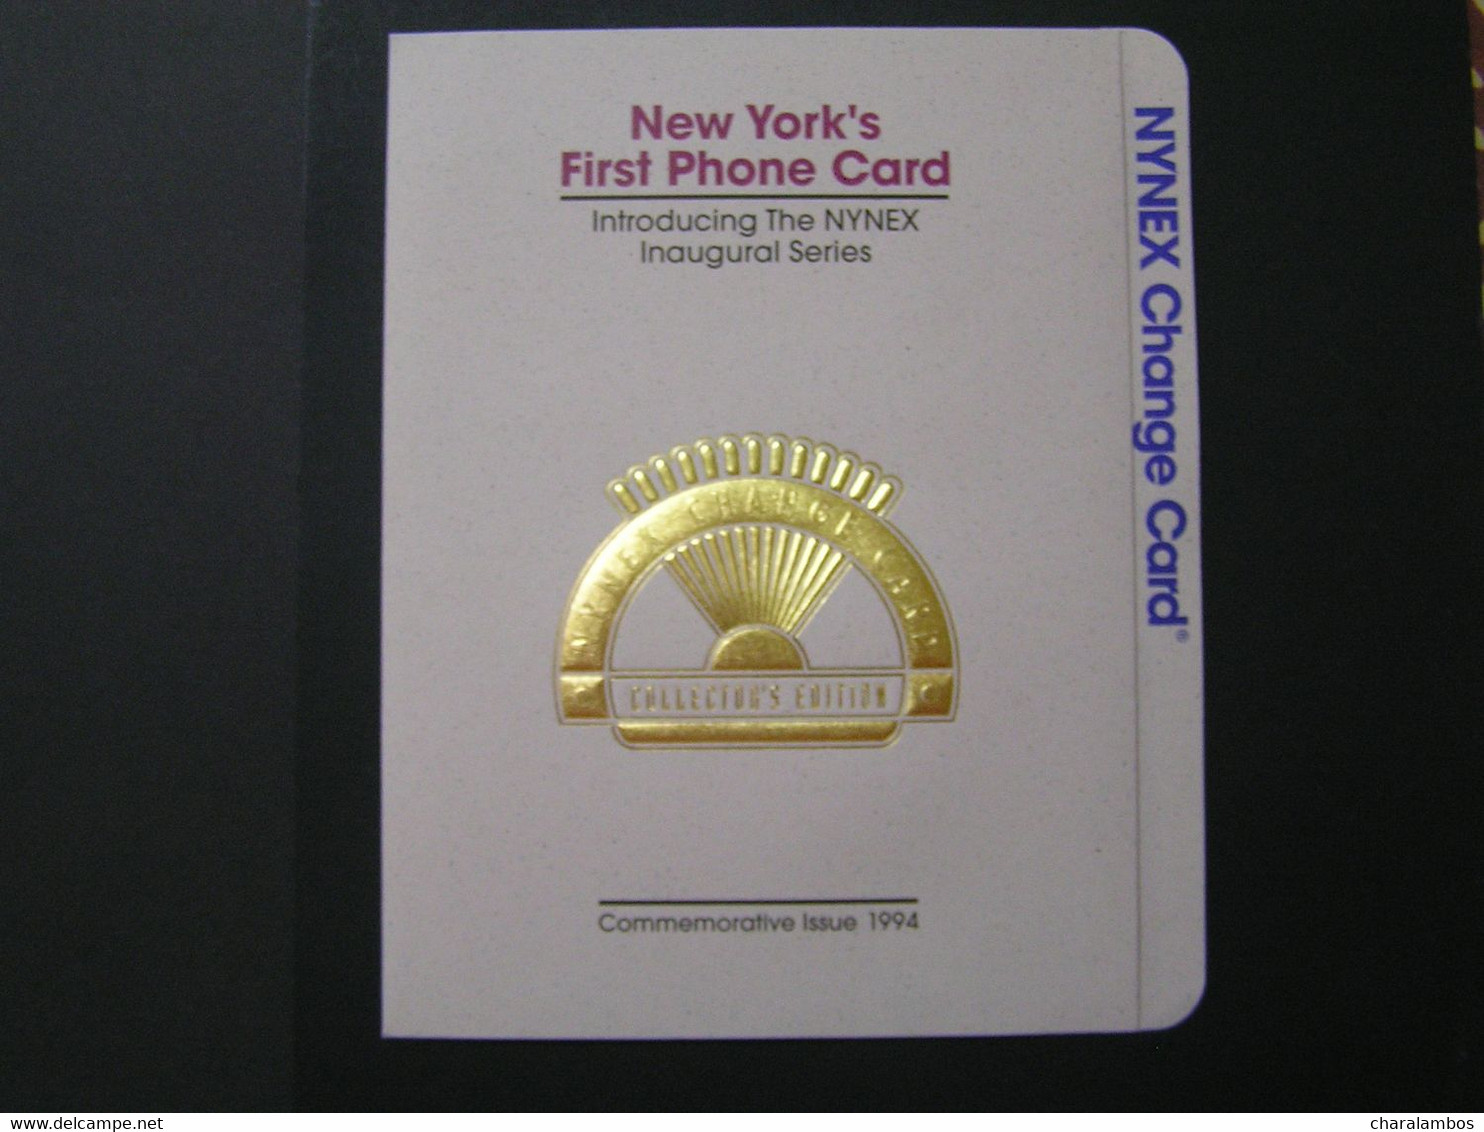 United States New Yorks First Phone Card NYNEX Change Card COLLECTORS EDITION 1994 MIND FOLDER. - [3] Magnetkarten